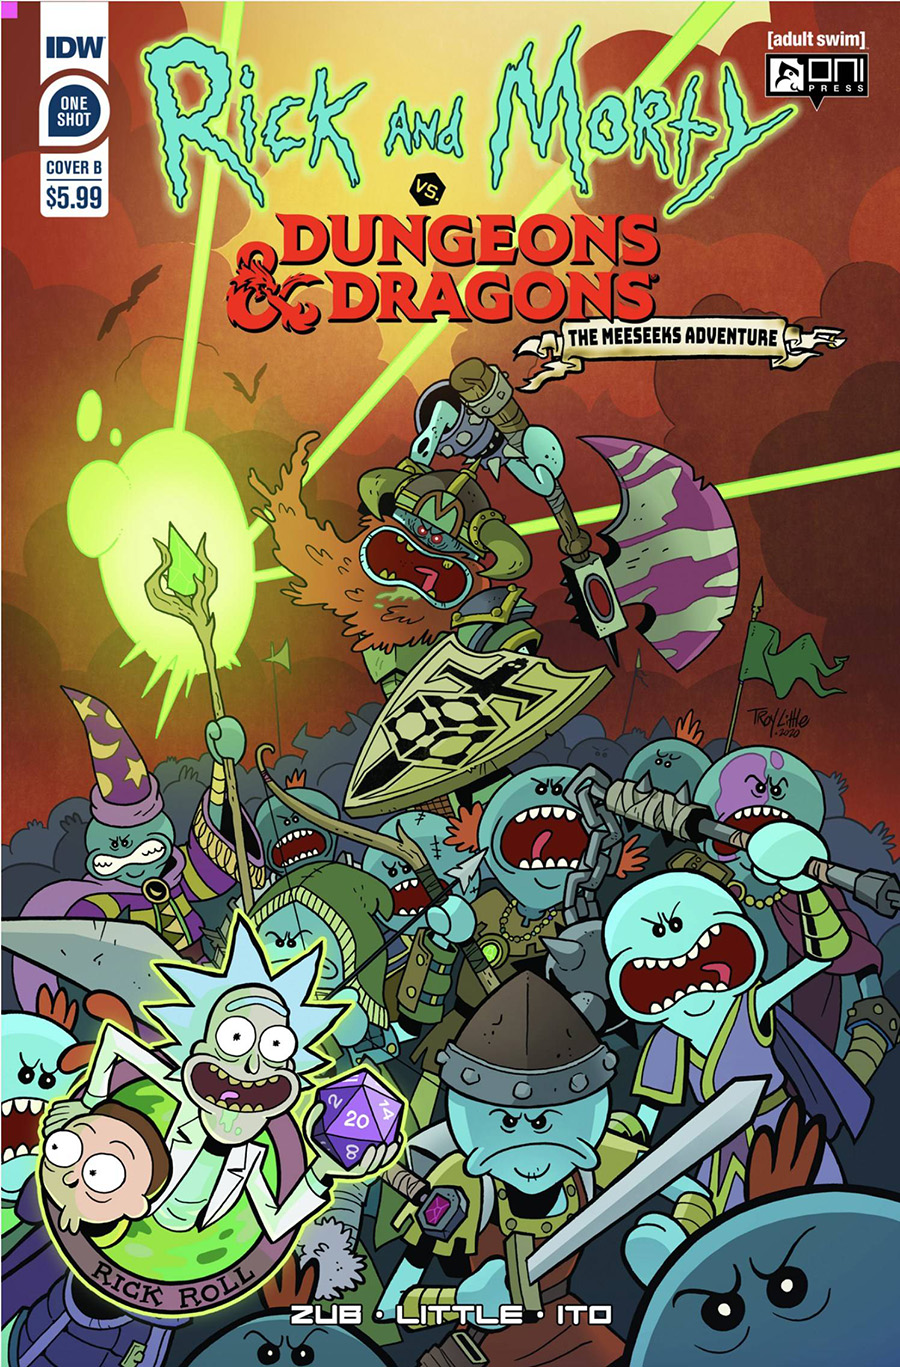 Rick And Morty vs Dungeons & Dragons Meeseeks Adventure #1 (One Shot) Cover B Variant Troy Little Cover